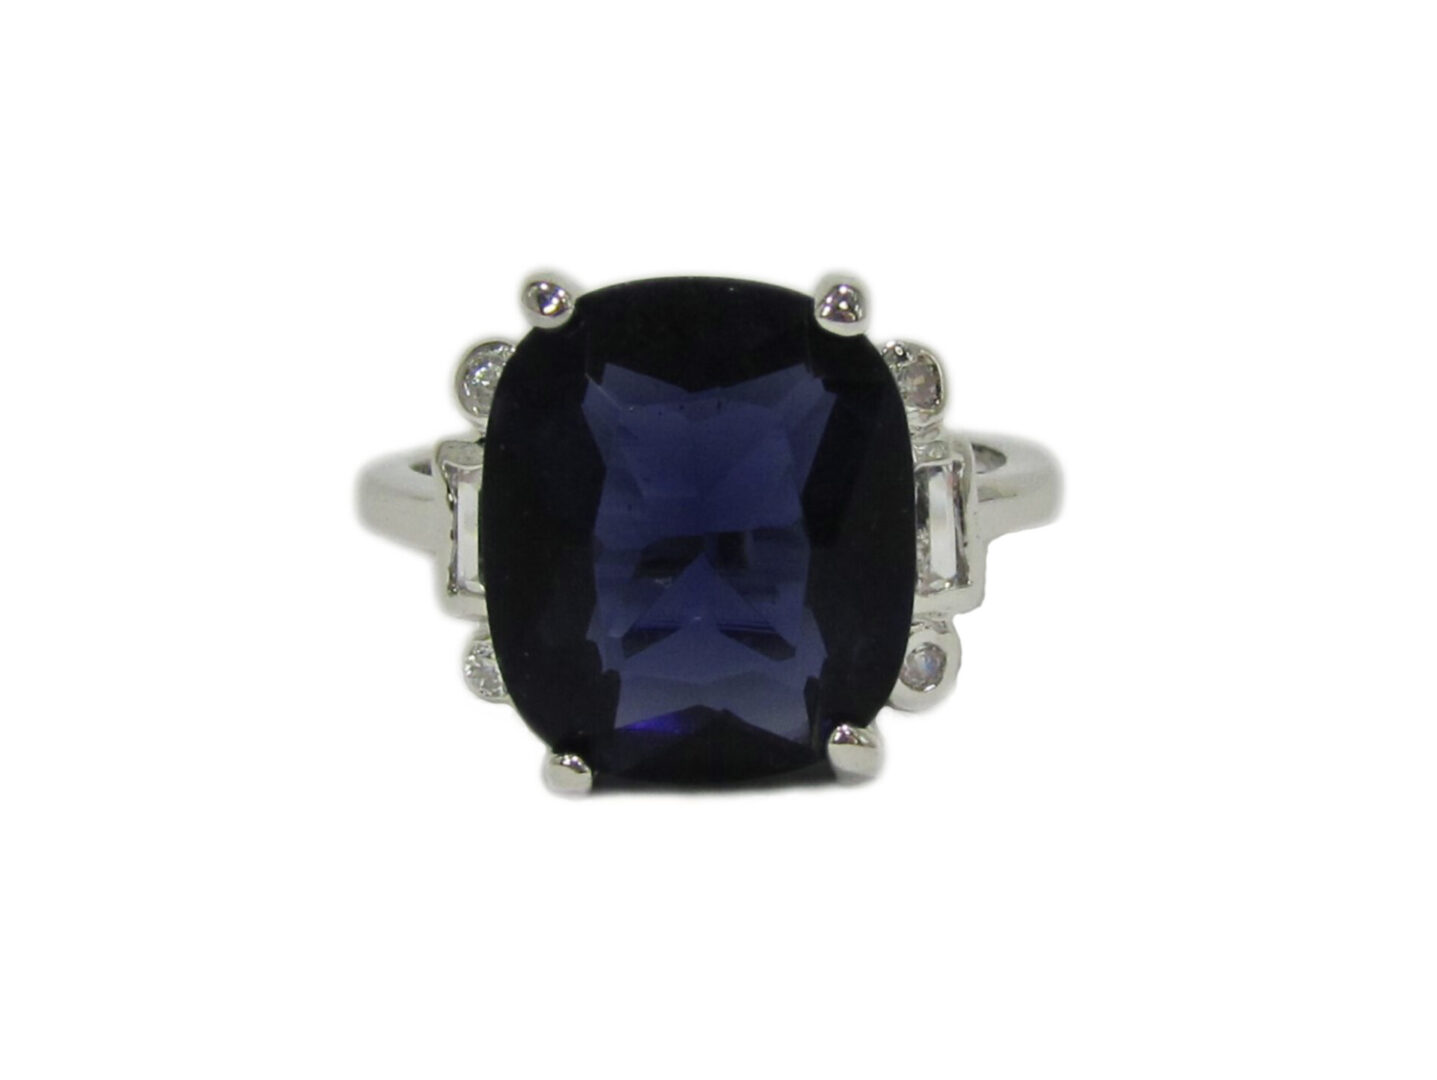 ring with large black oval crystal gem